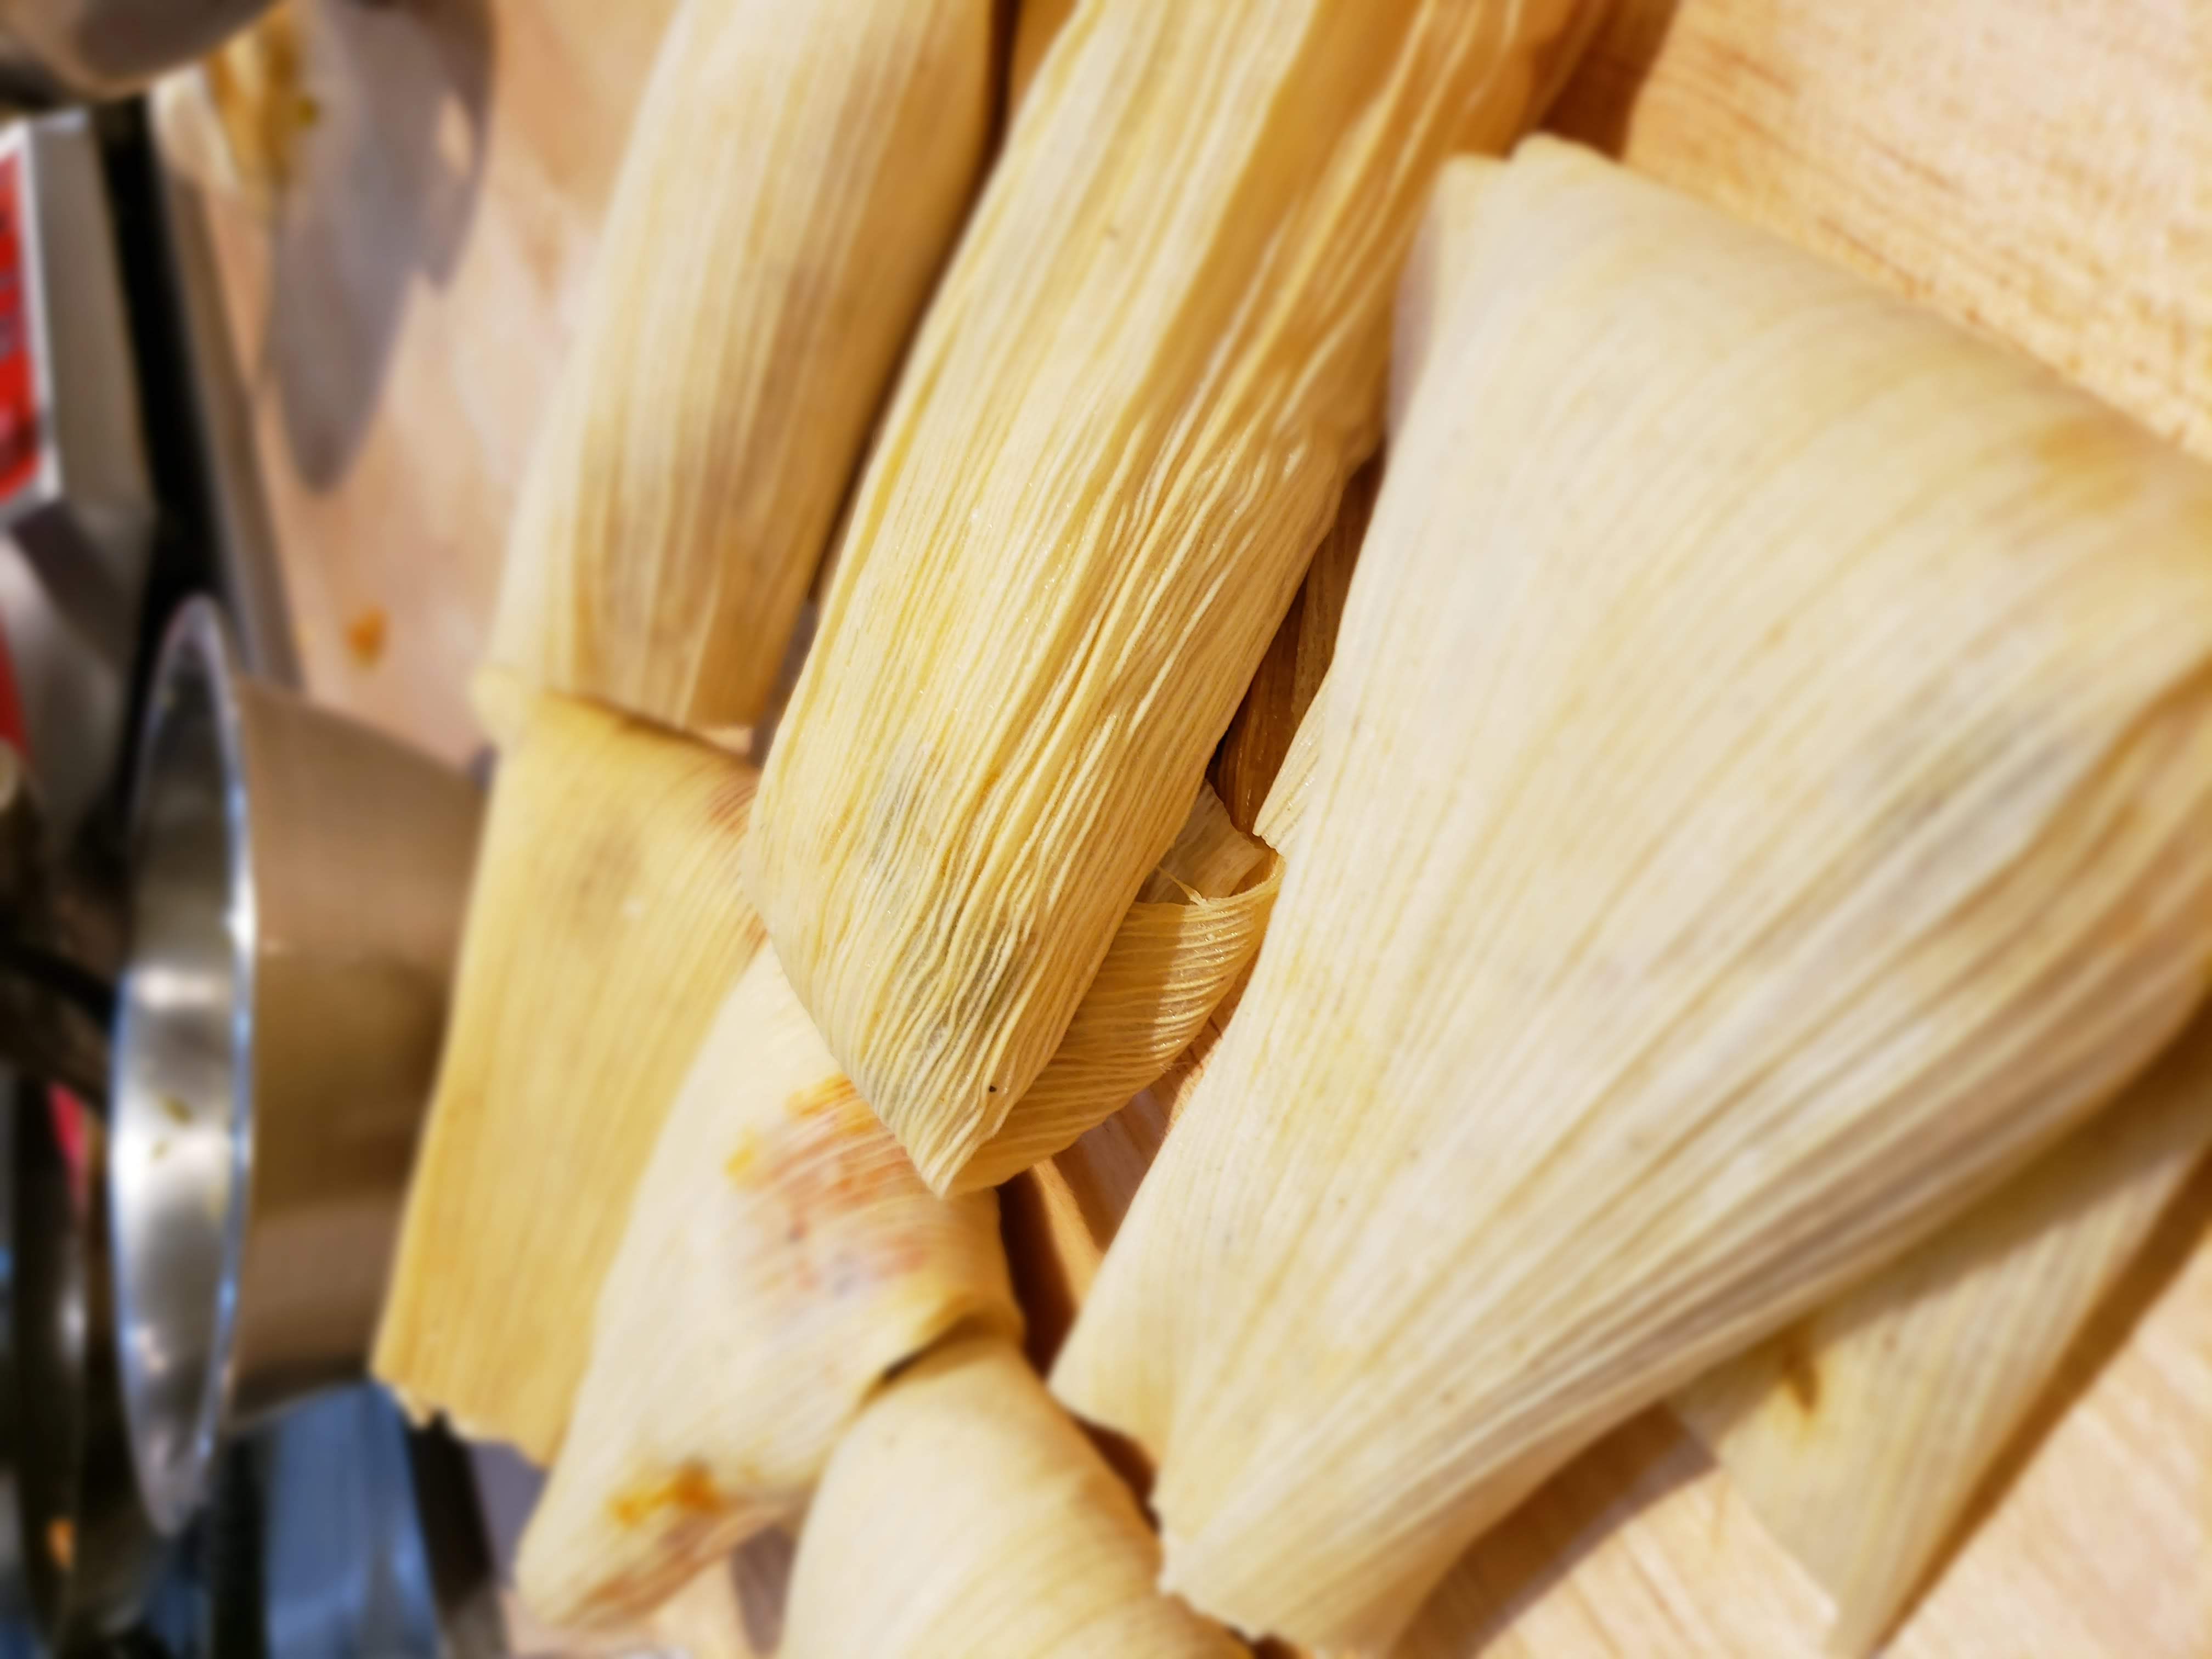 Tamales being prepared in Class